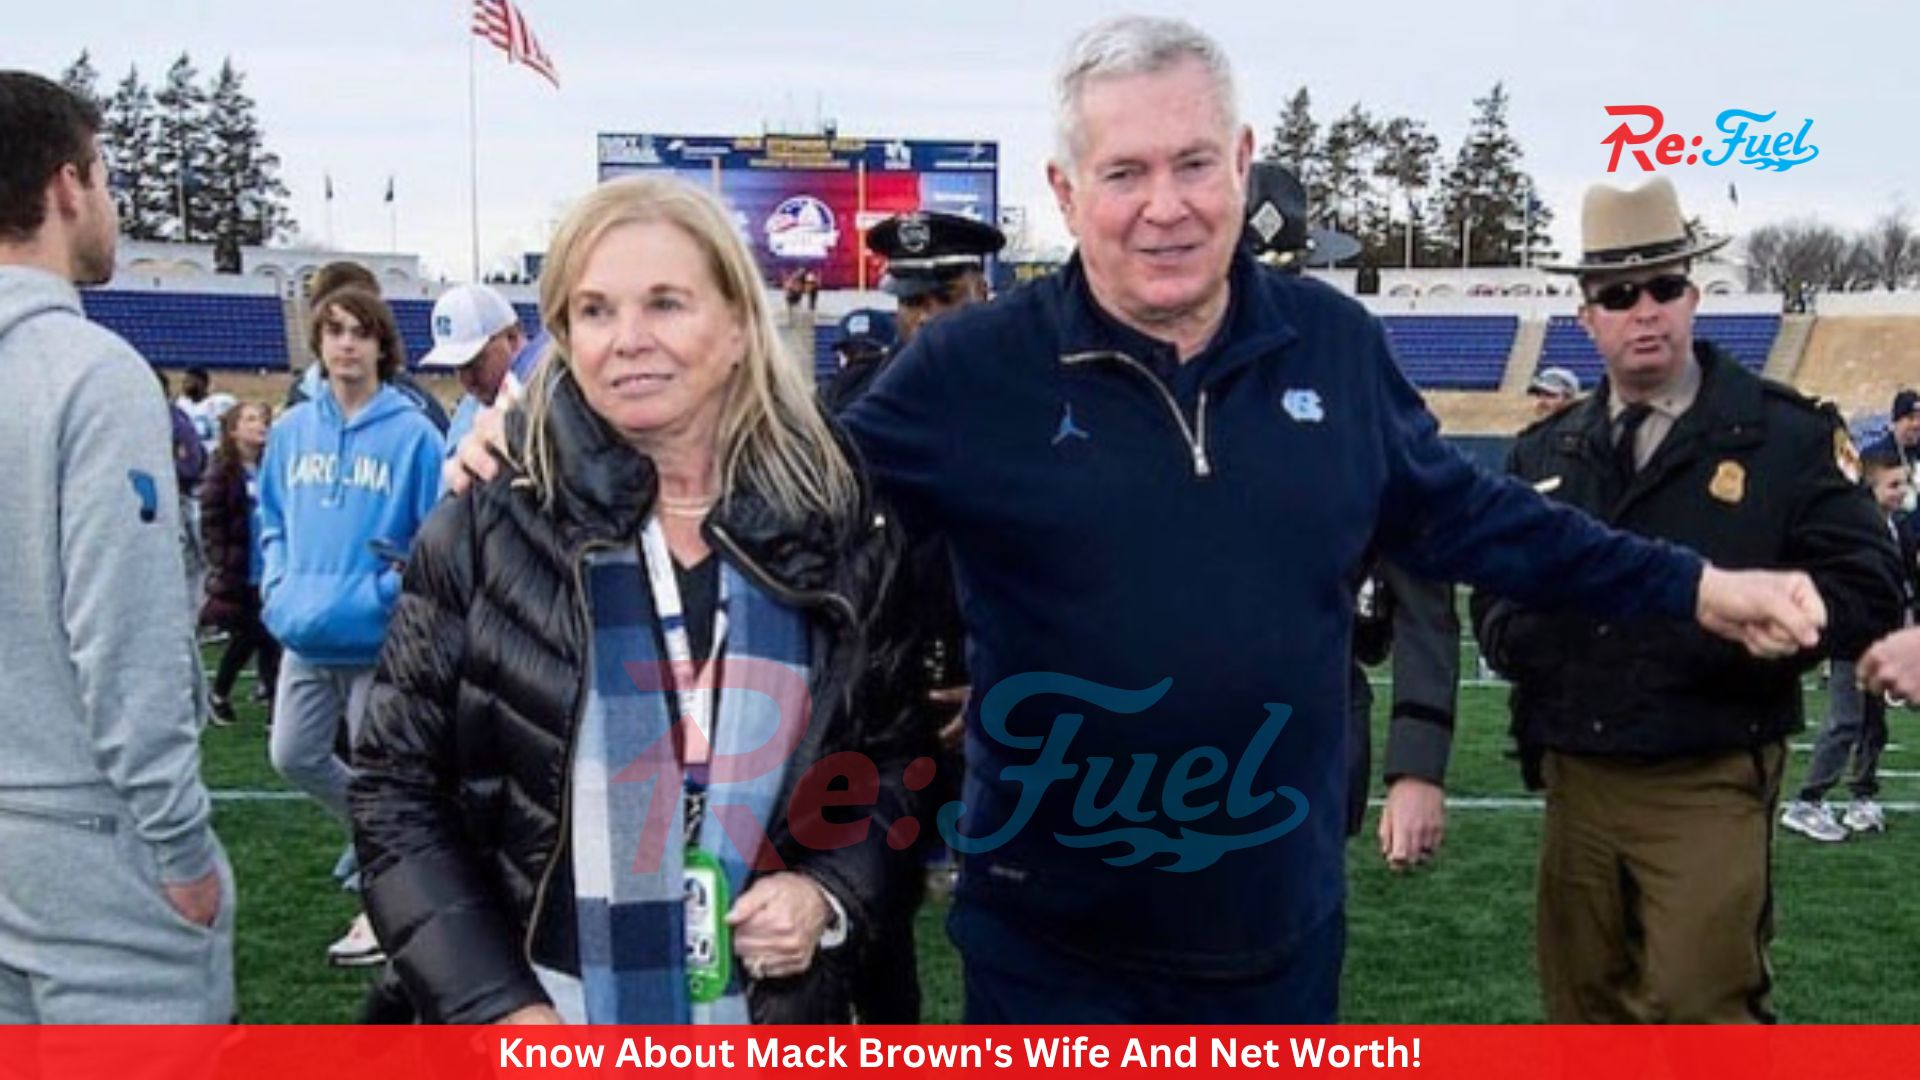 Know About Mack Brown's Wife And Net Worth!